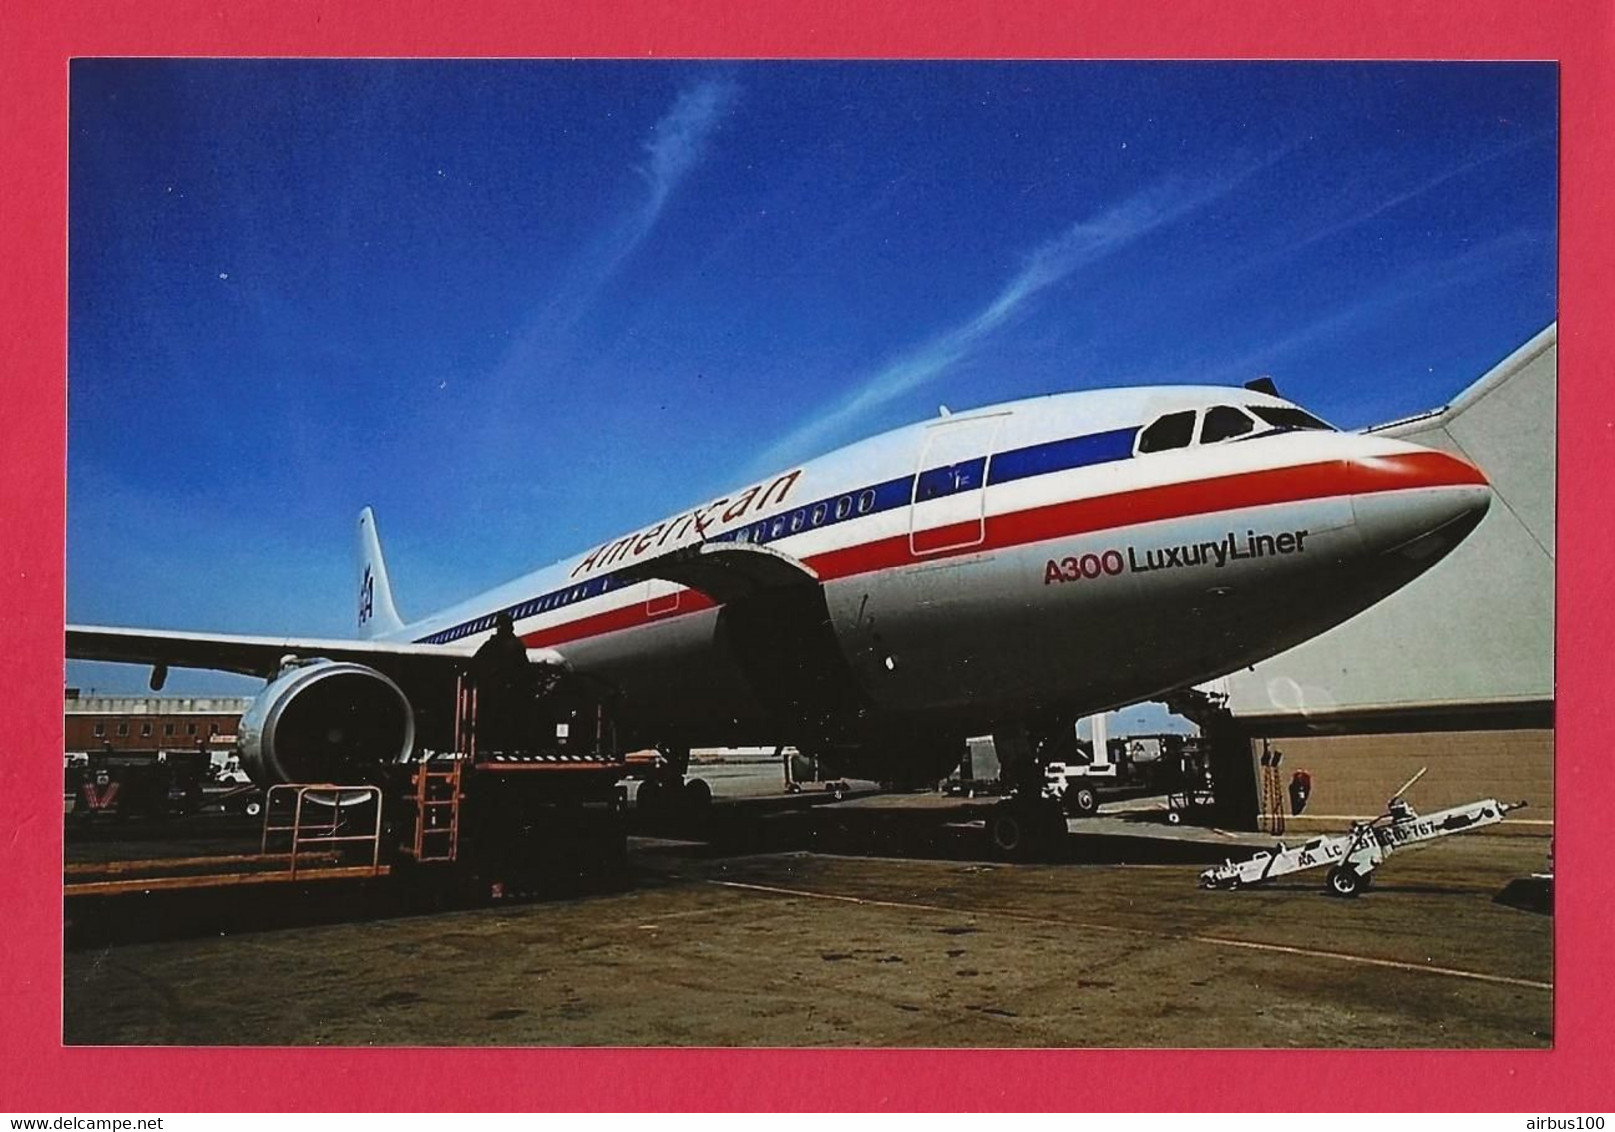 BELLE PHOTO REPRODUCTION AVION PLANE FLUGZEUG - AIRBUS A 300 LUXURY LINER AMERICAN - Aviation